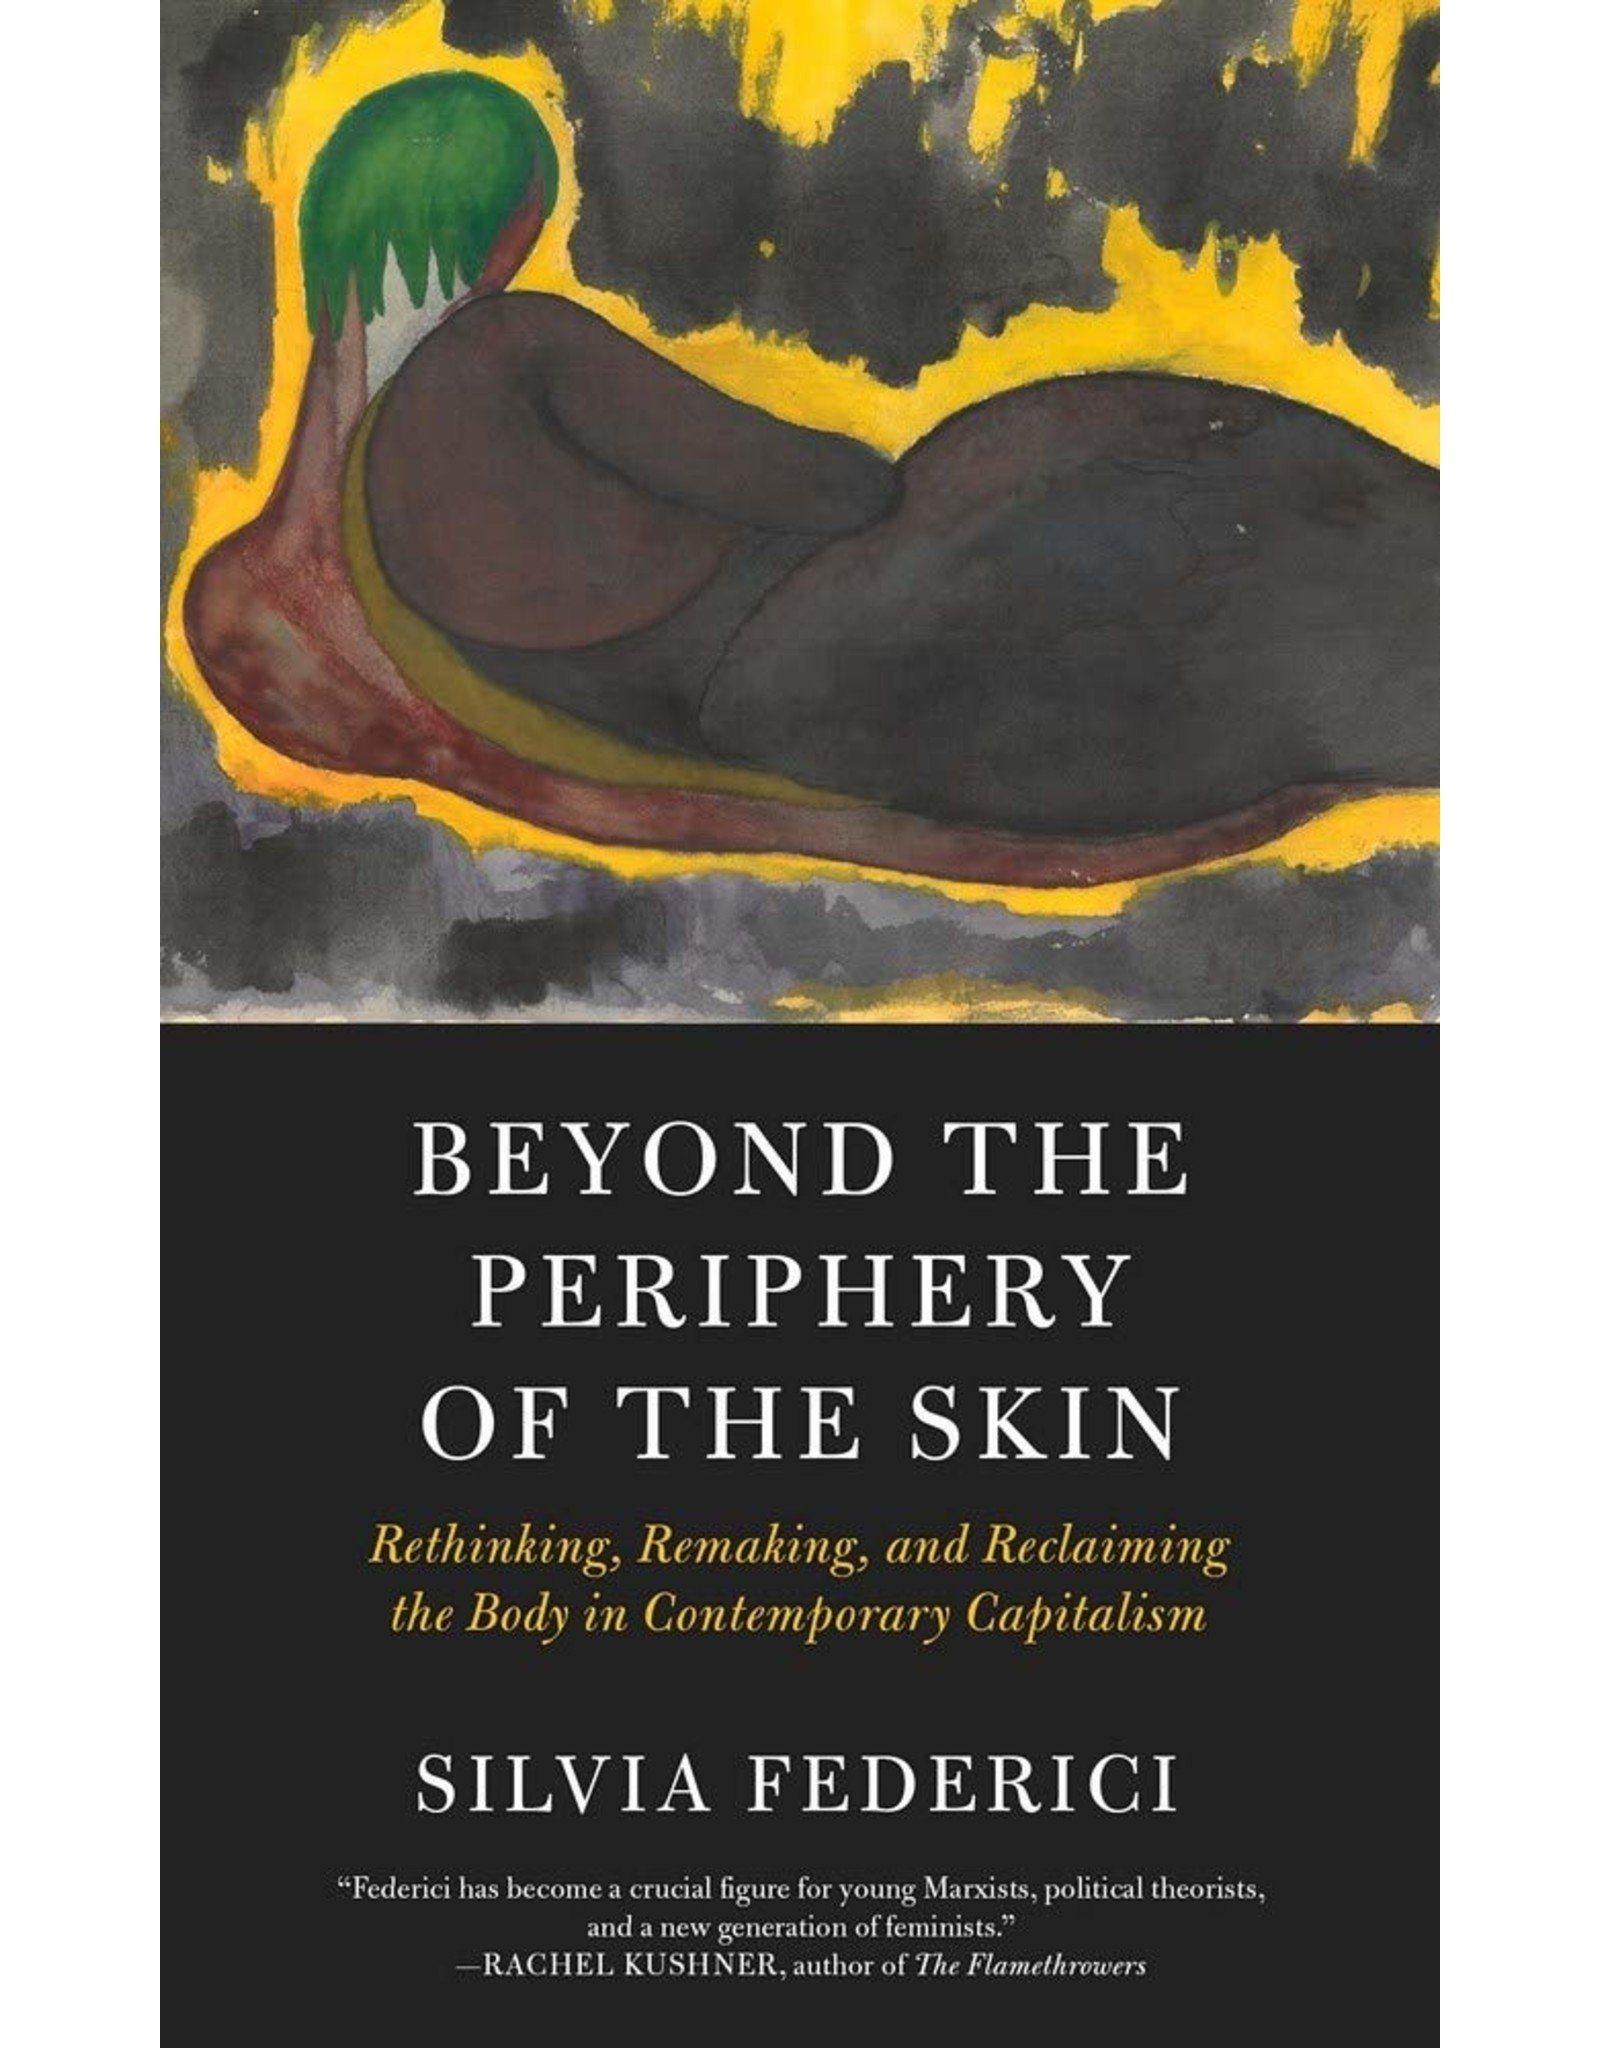 Literature Beyond the Periphery of the Skin: Rethinking, Remaking, and Reclaiming the Body in Contemporary Capitalism